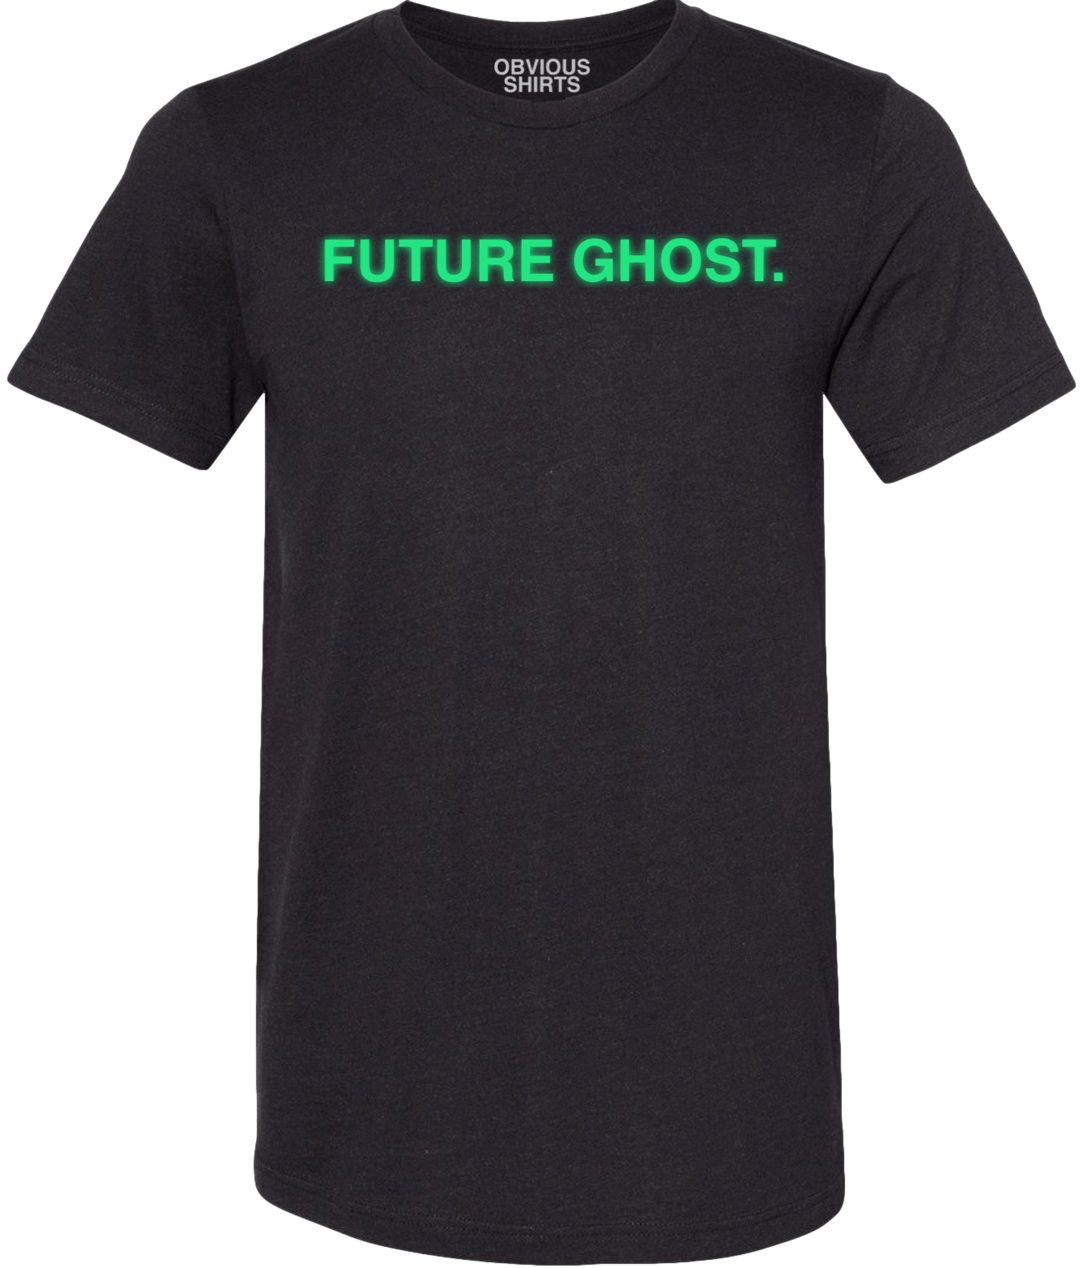 FUTURE GHOST (GLOW IN THE DARK) - OBVIOUS SHIRTS